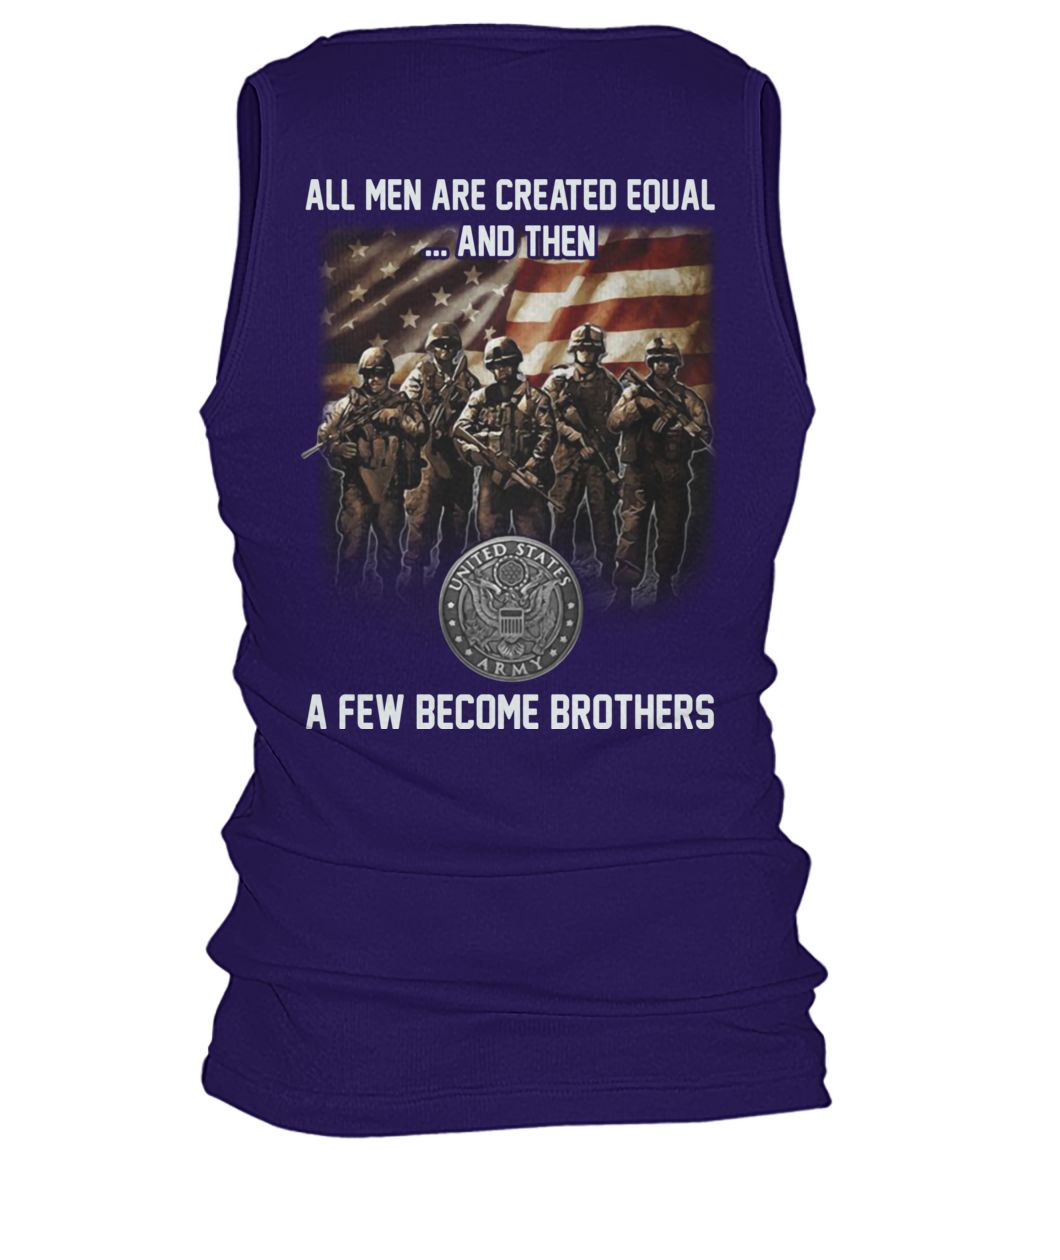 United states army all men are created equal and then a few become brothers men's tank top